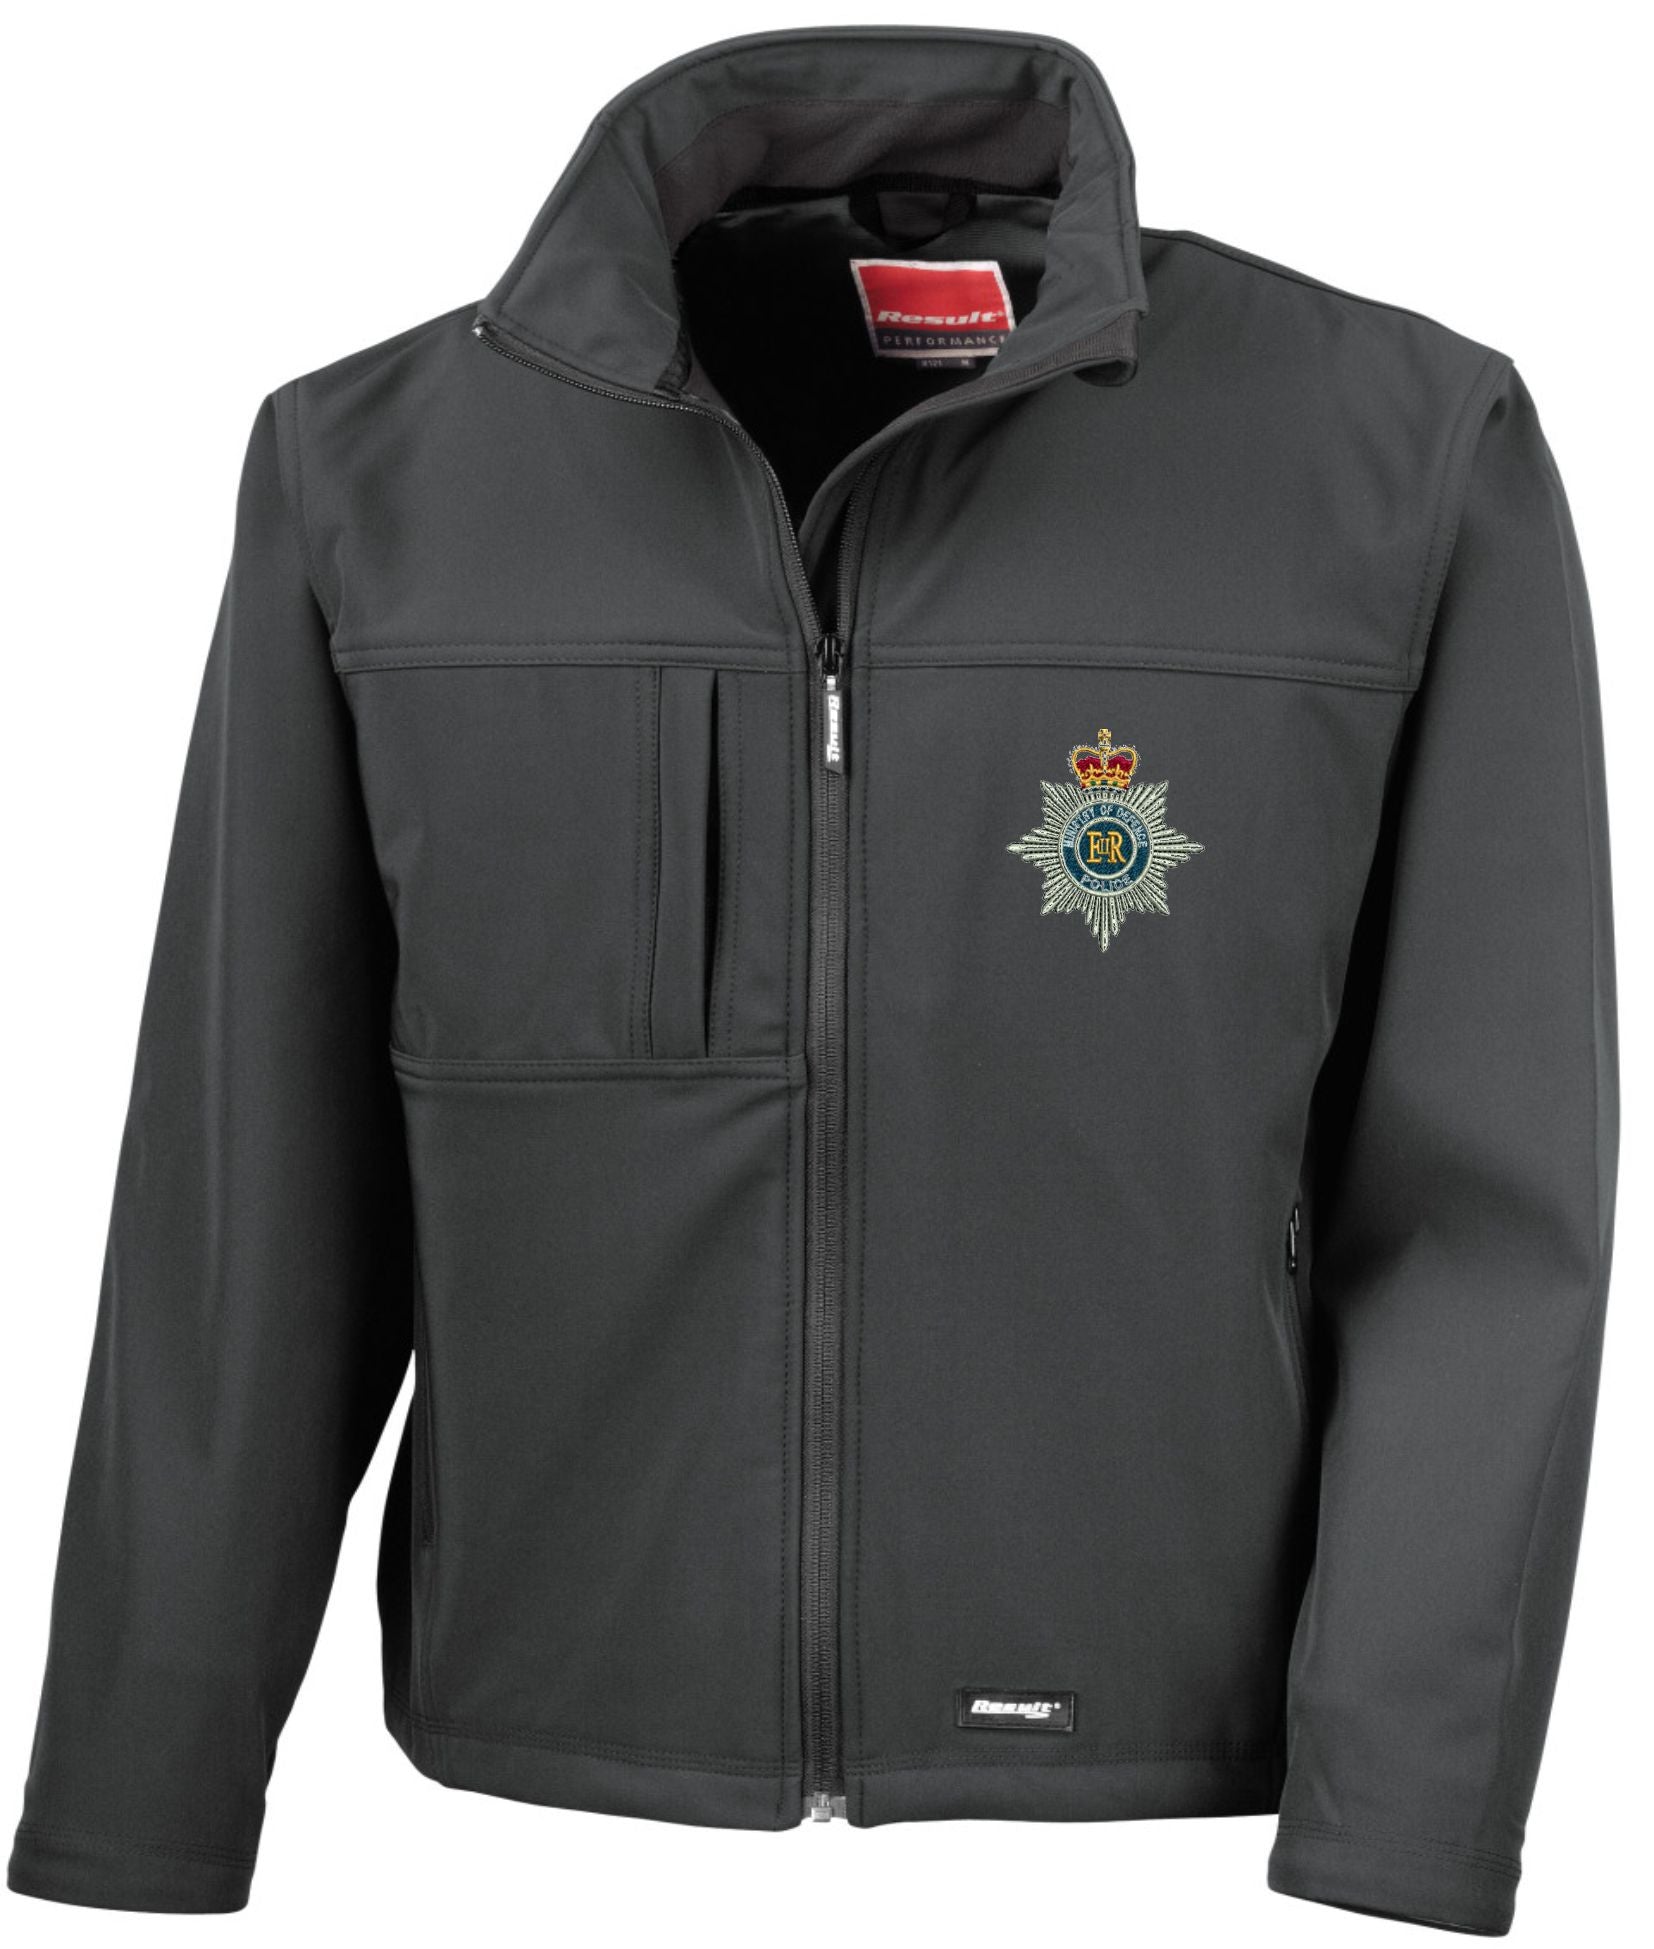 Ministry of defence police softshell